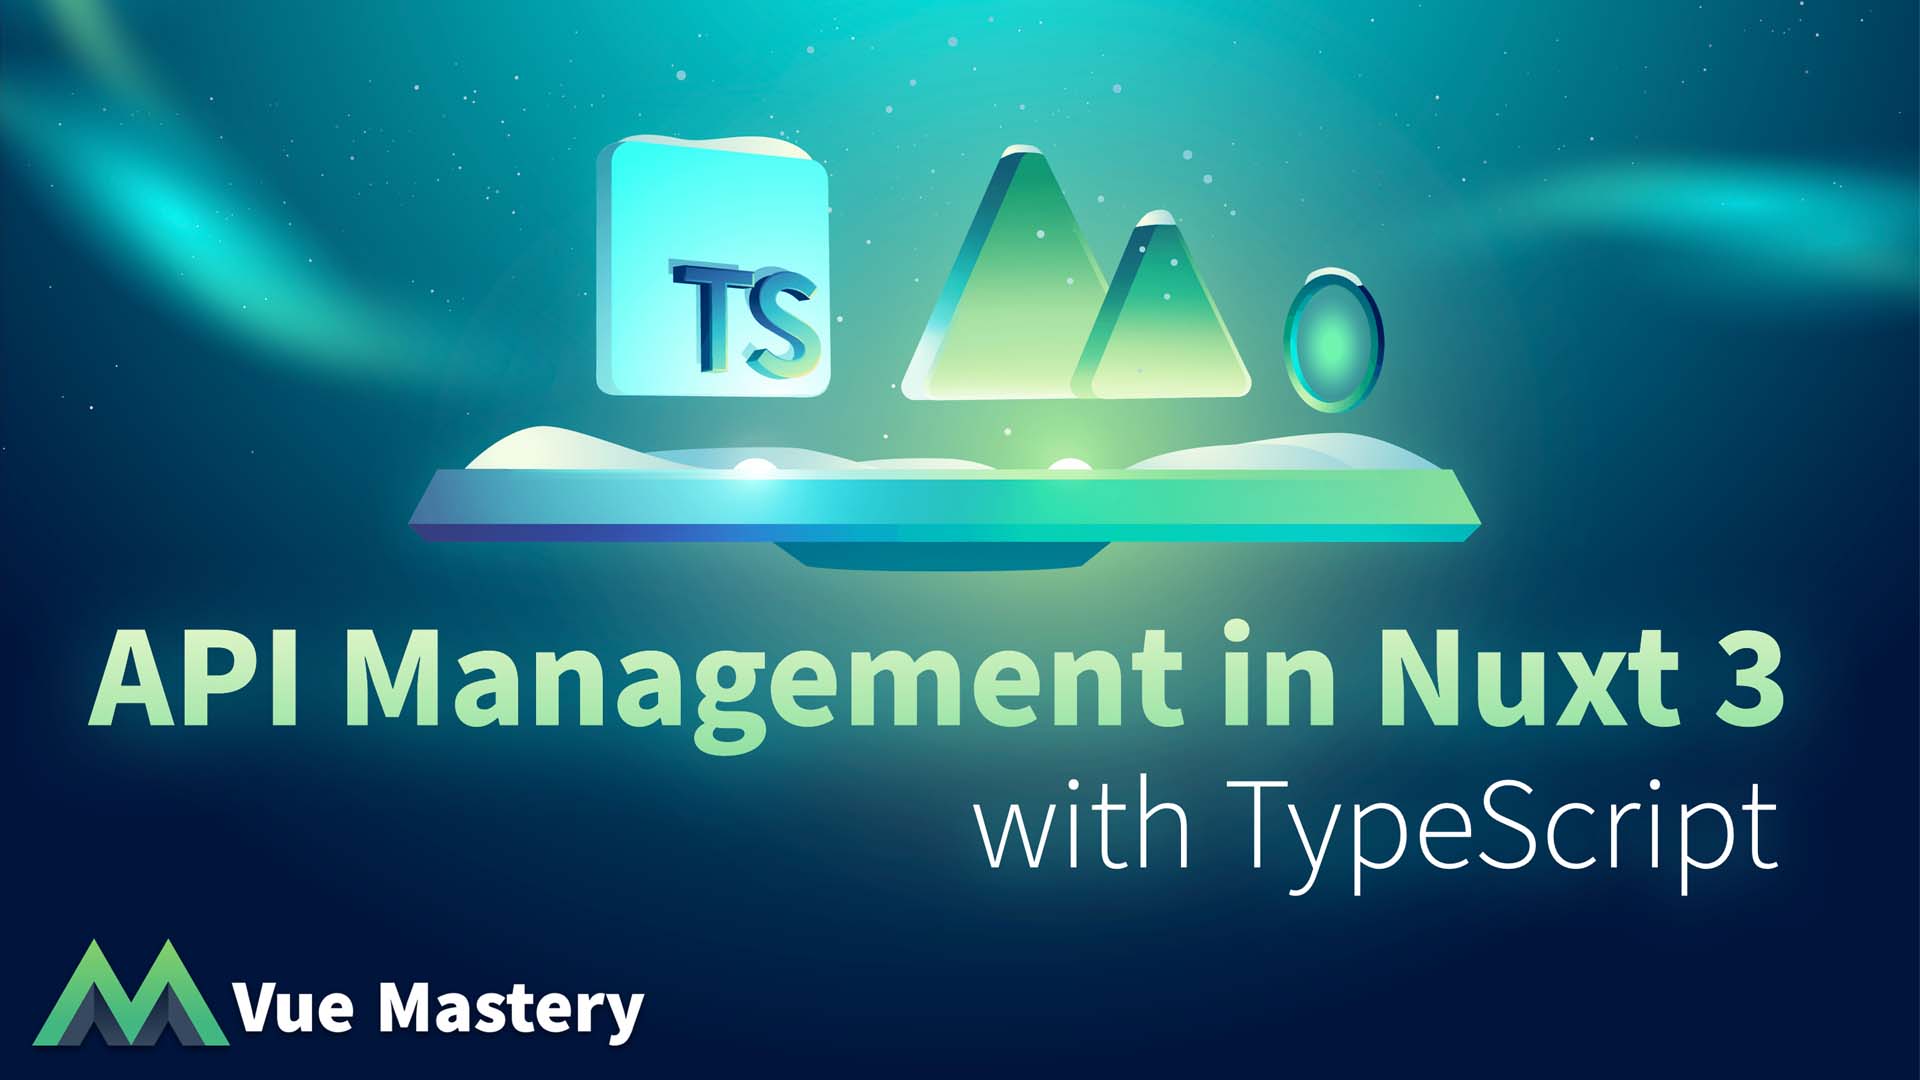 API Management in Nuxt 3 with TypeScript